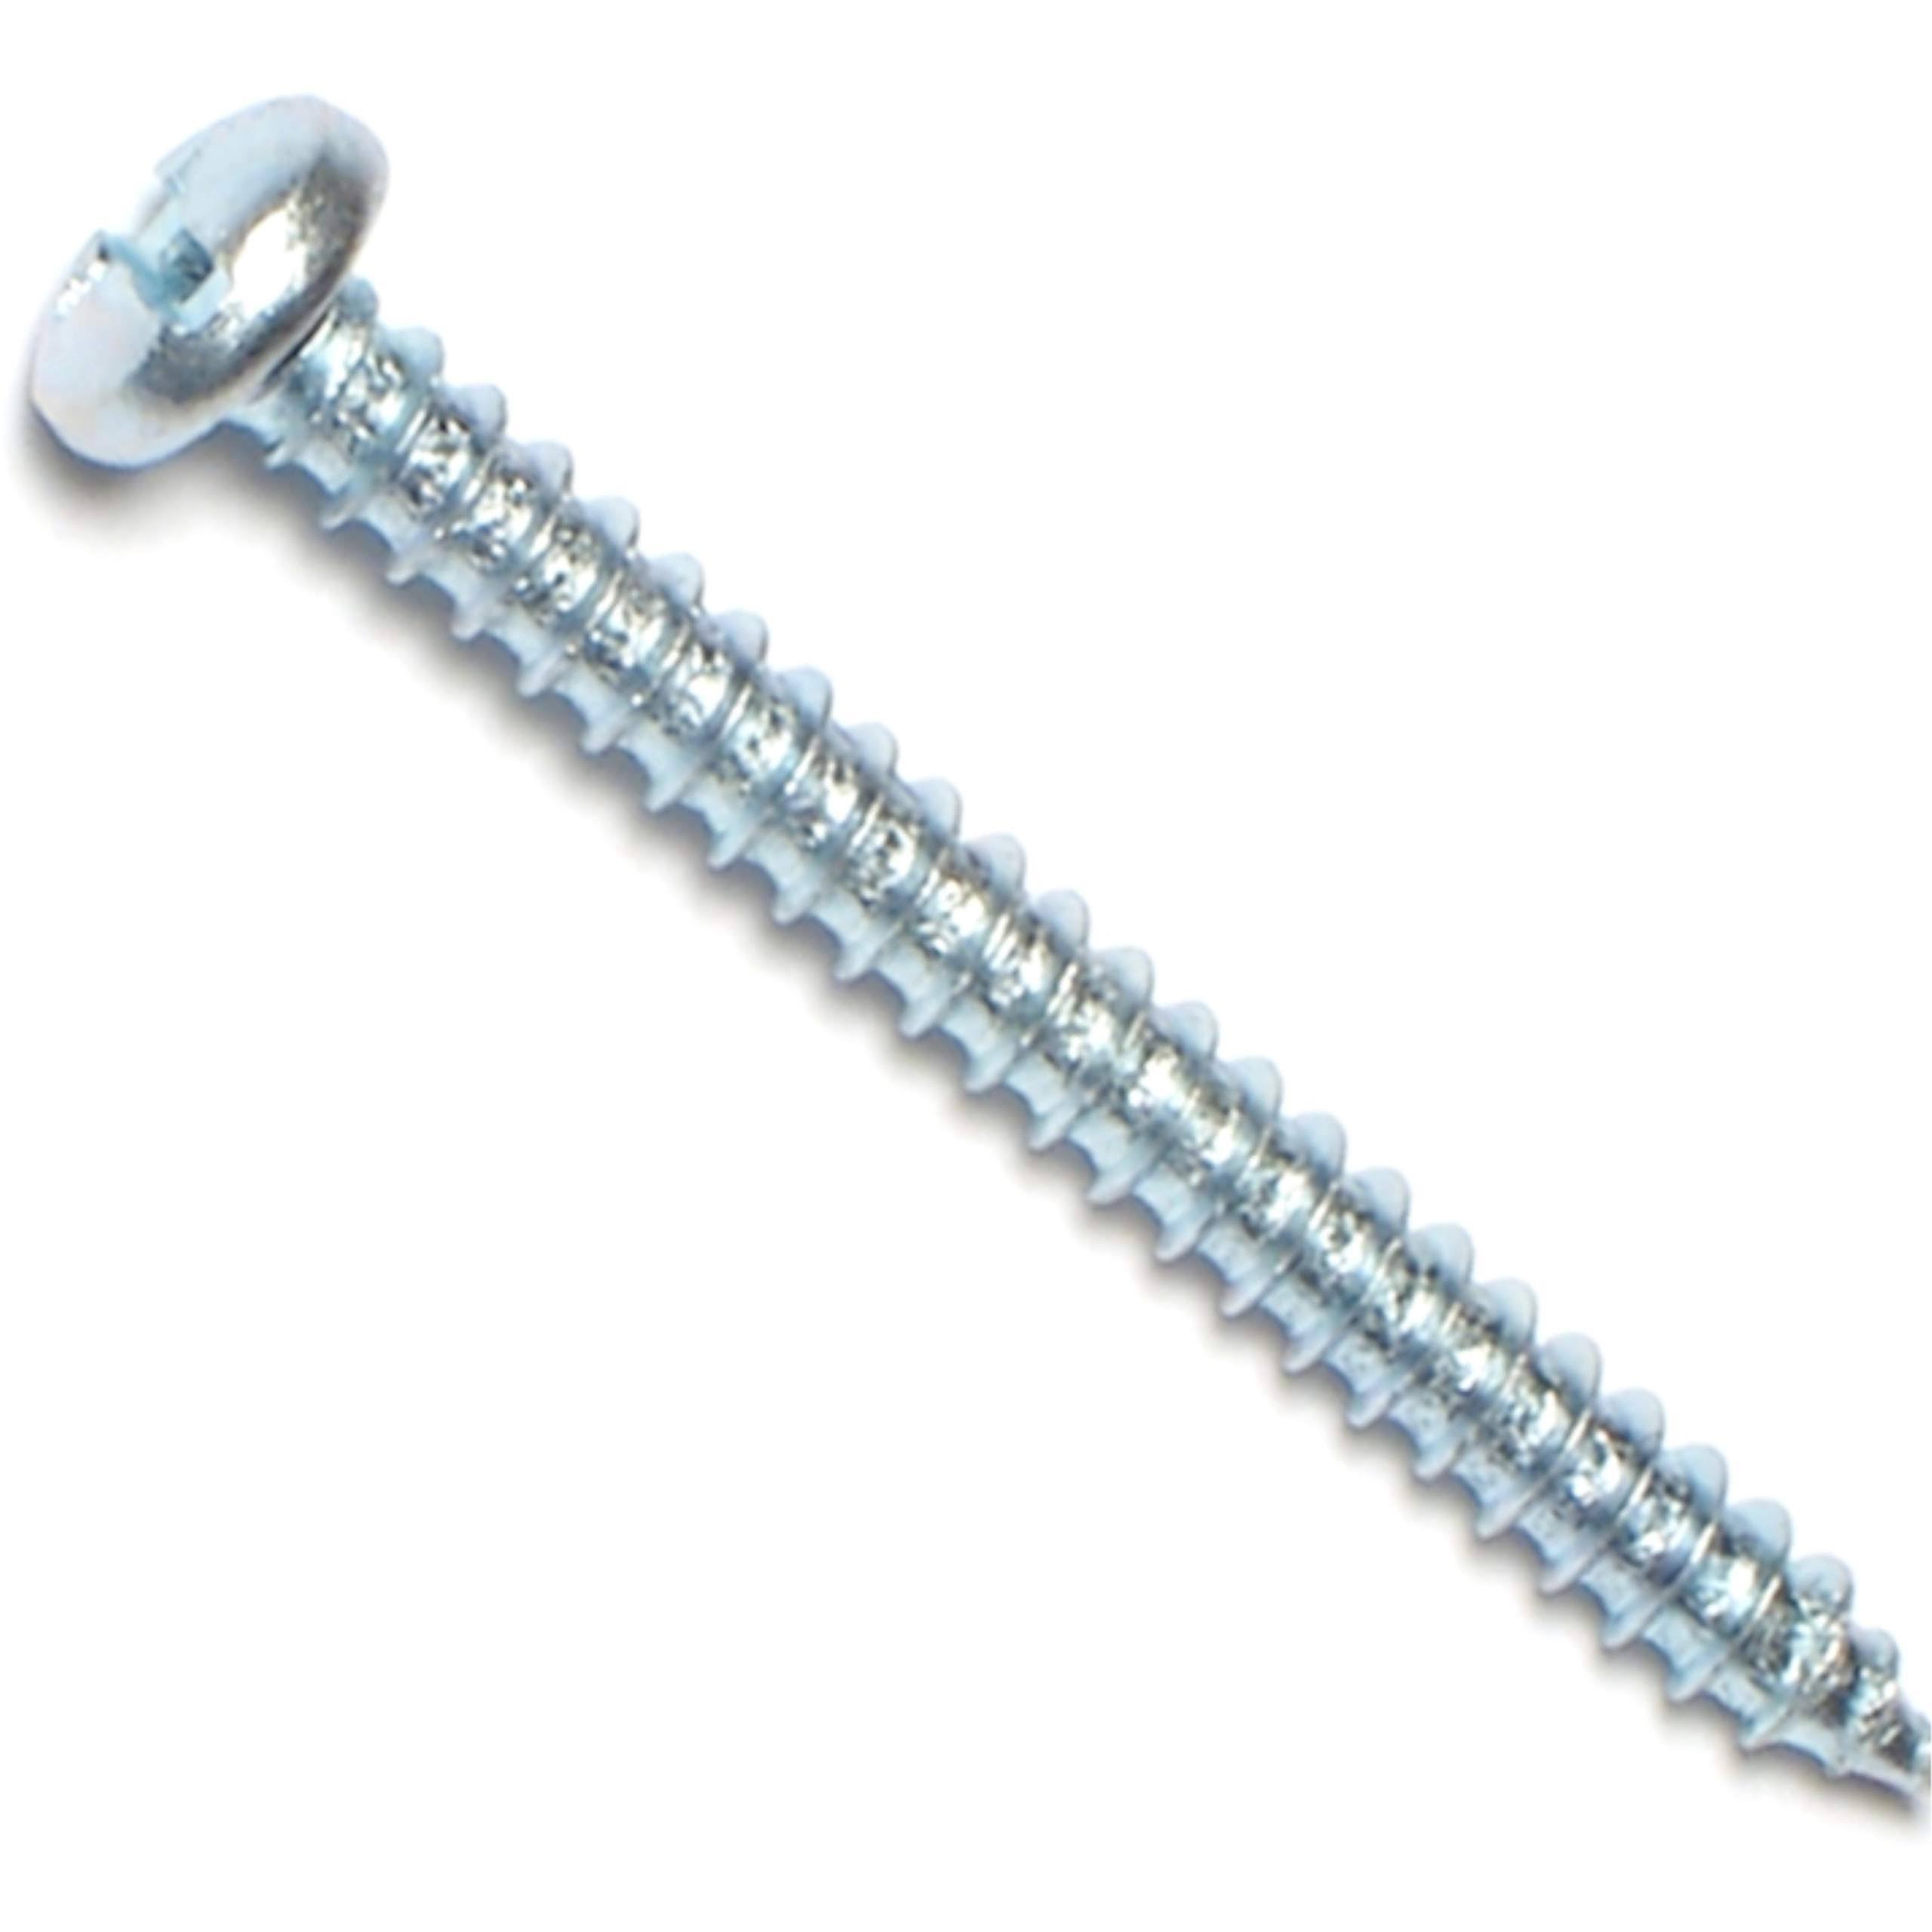 Midwest 03163 Combo Tapping Screw - Zinc Plated, 6"x1-1/2"